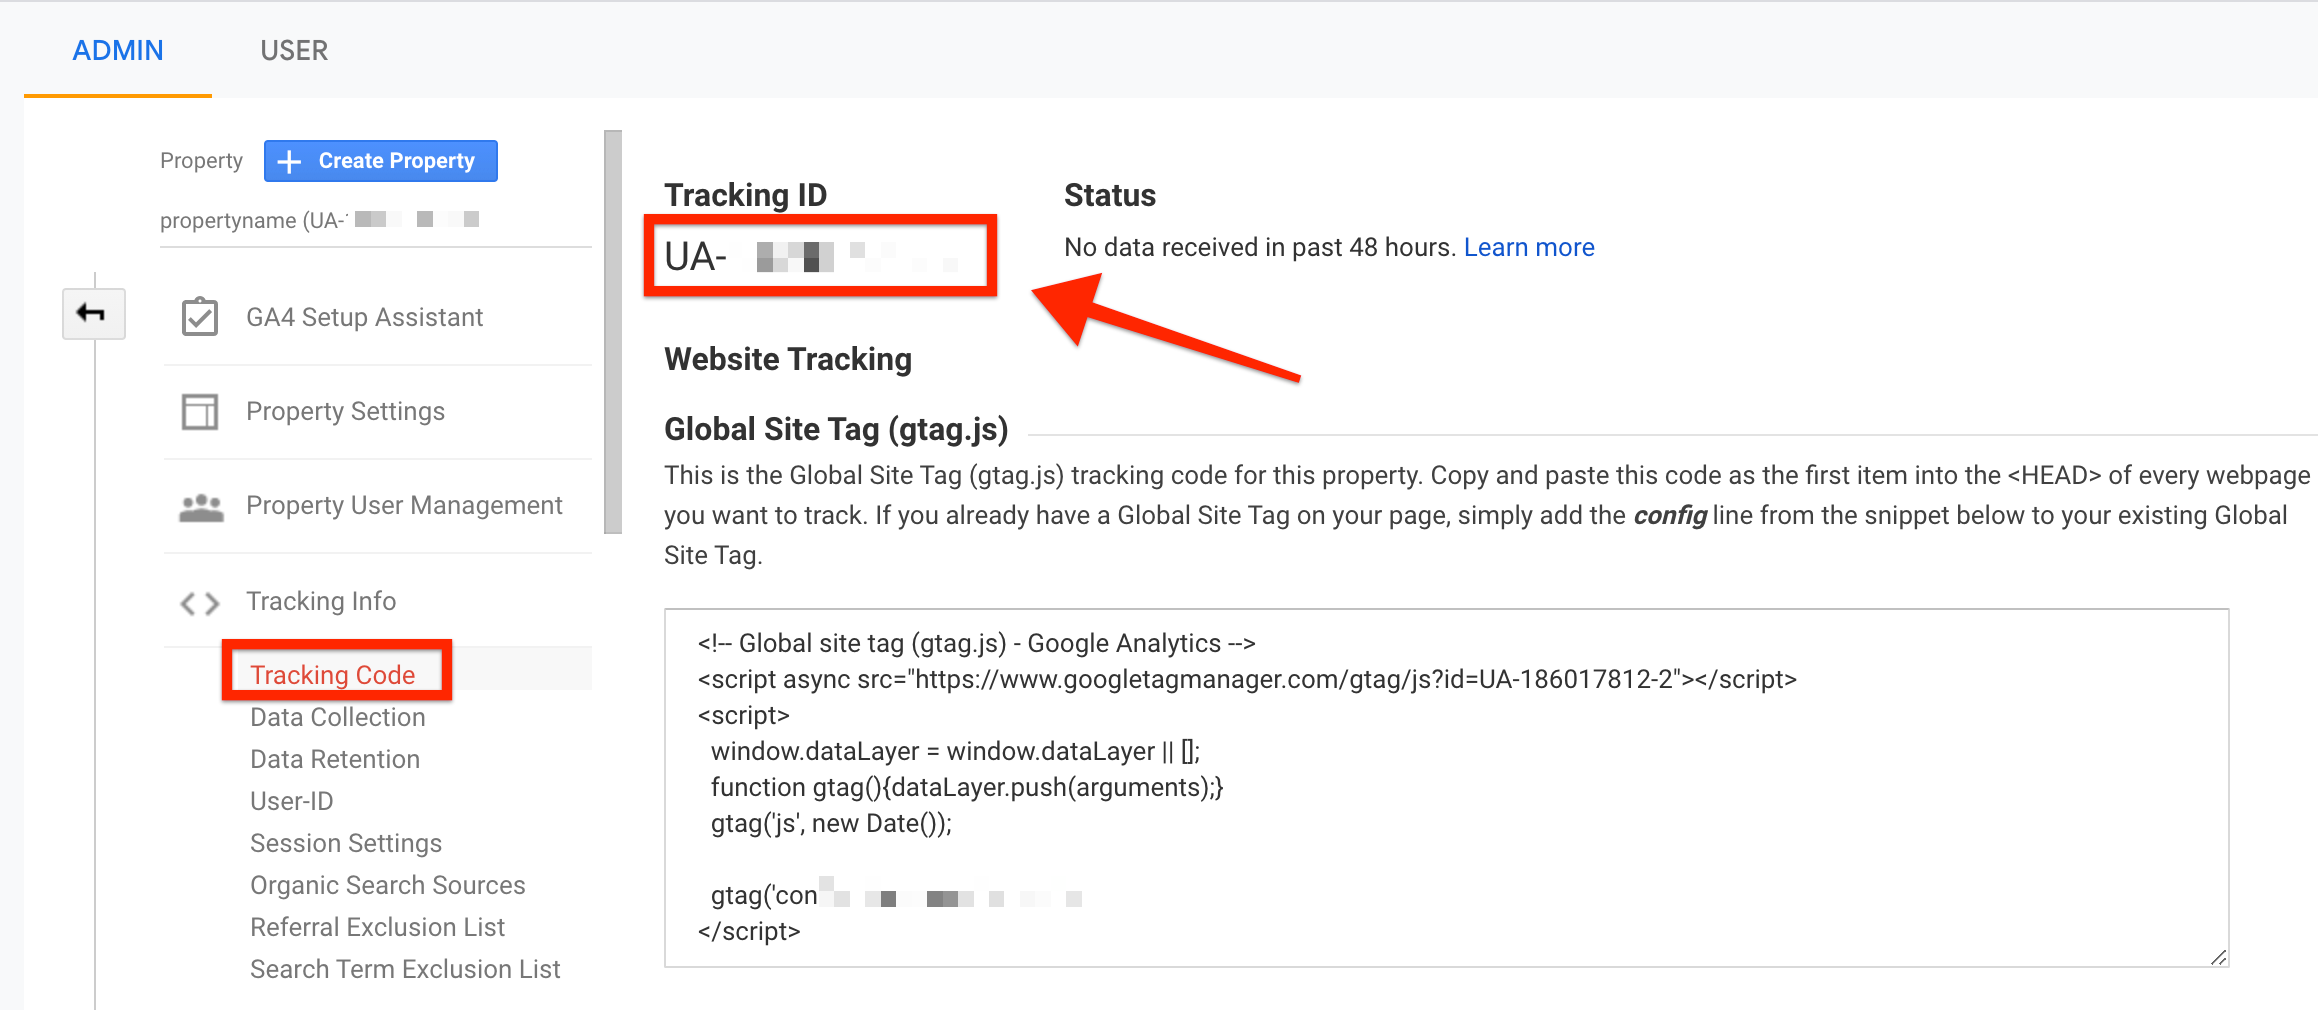 The screen shows the admin view of a google analytics account. From the left side admin menu, the TRACKING CODE tab, beneath the TRACKING INFO dropdown, is circled. On the main page, the TRACKING ID is circled.